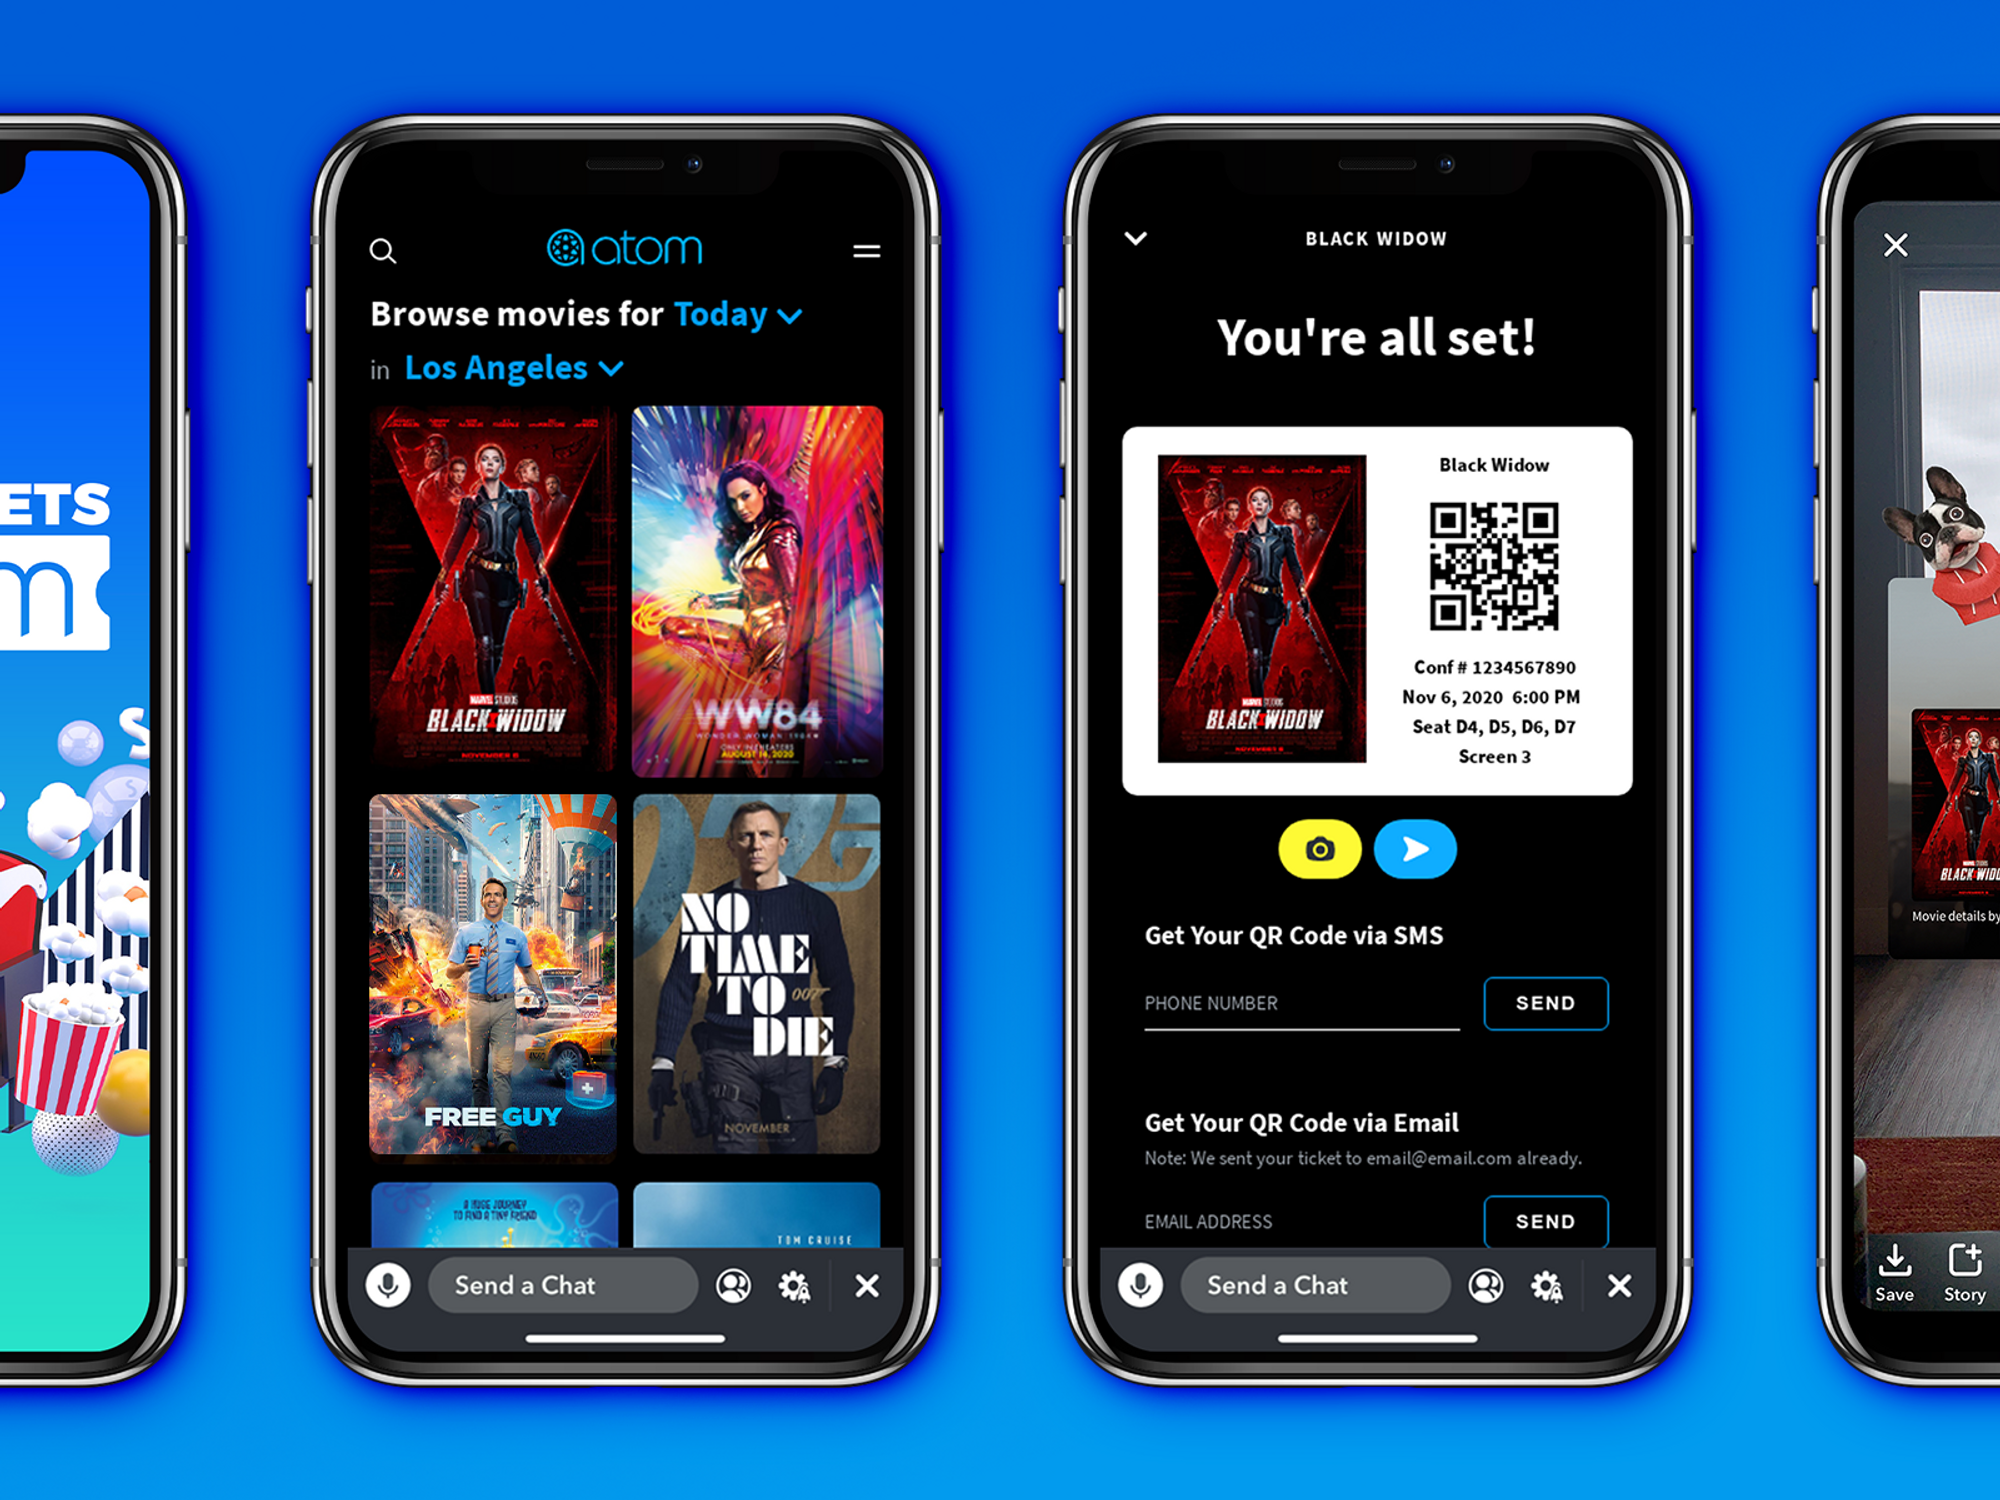 You Can Now Buy Movie Tickets on Snapchat